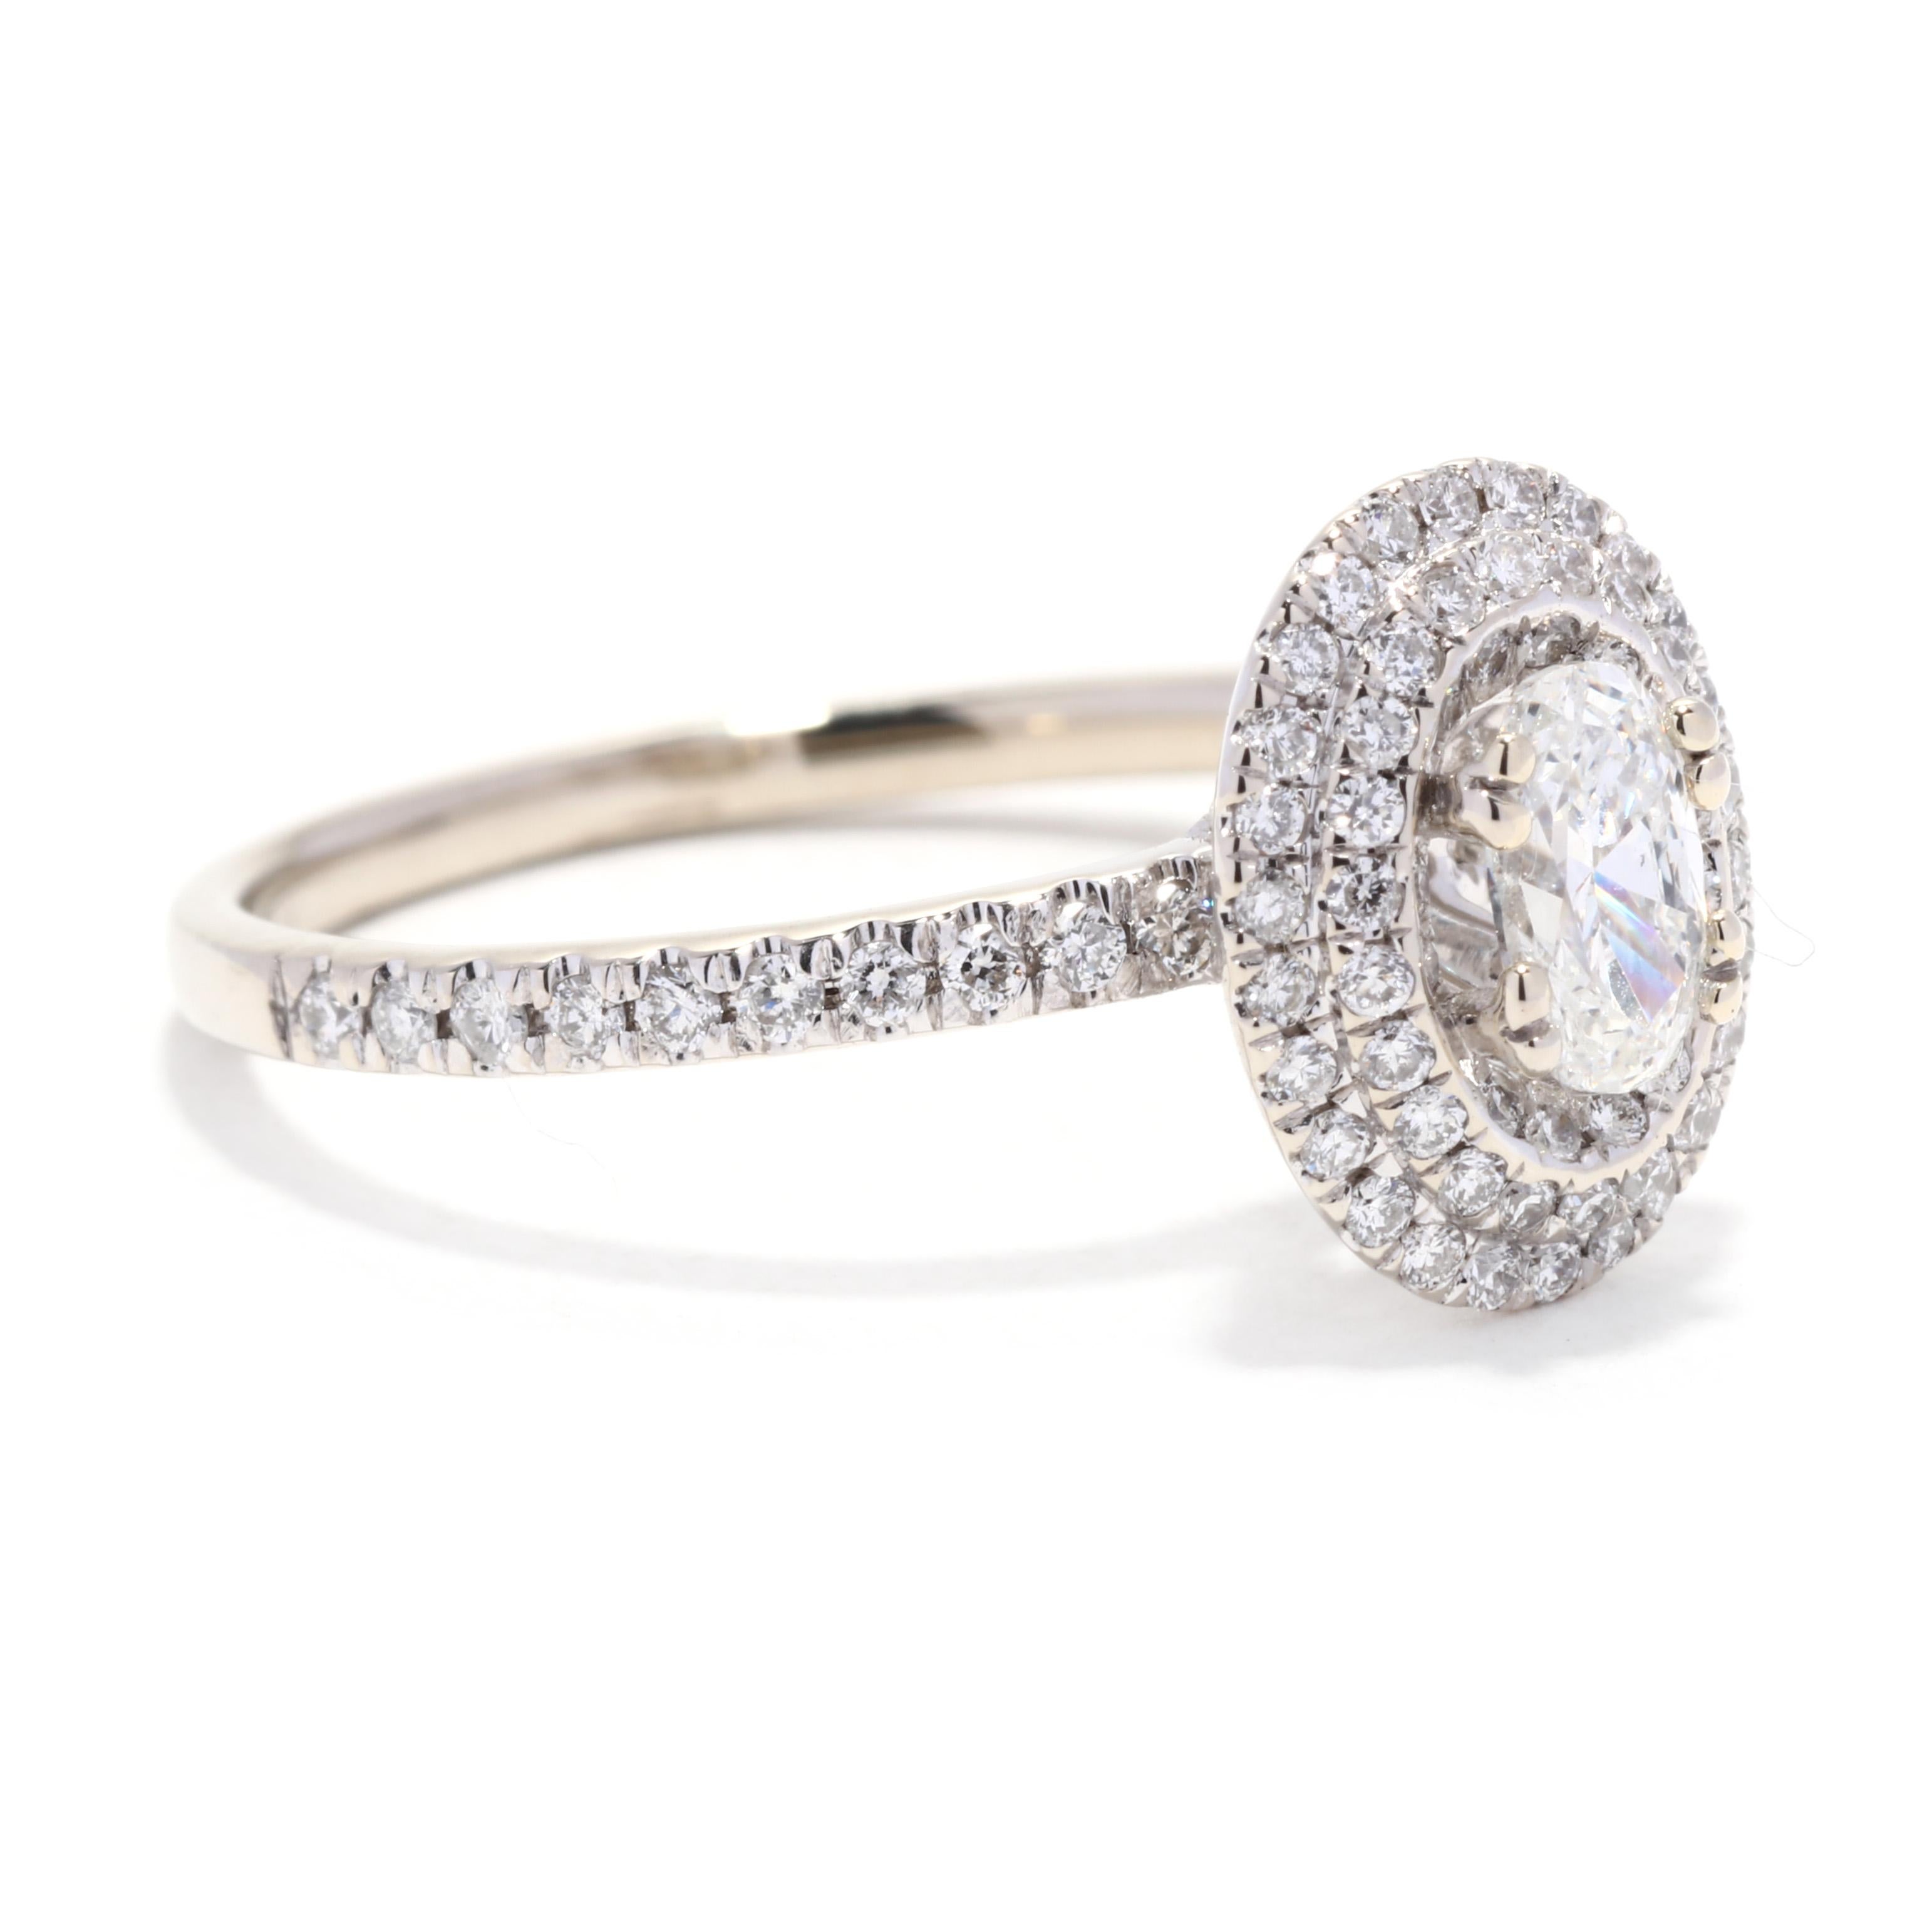 A 14 karat white gold oval diamond halo engagement ring. This simple engagement ring features a prong set, oval cut diamond weighing approximately .32 carat surrounded by a double halo of pavé set diamonds and down the band weighing approximately